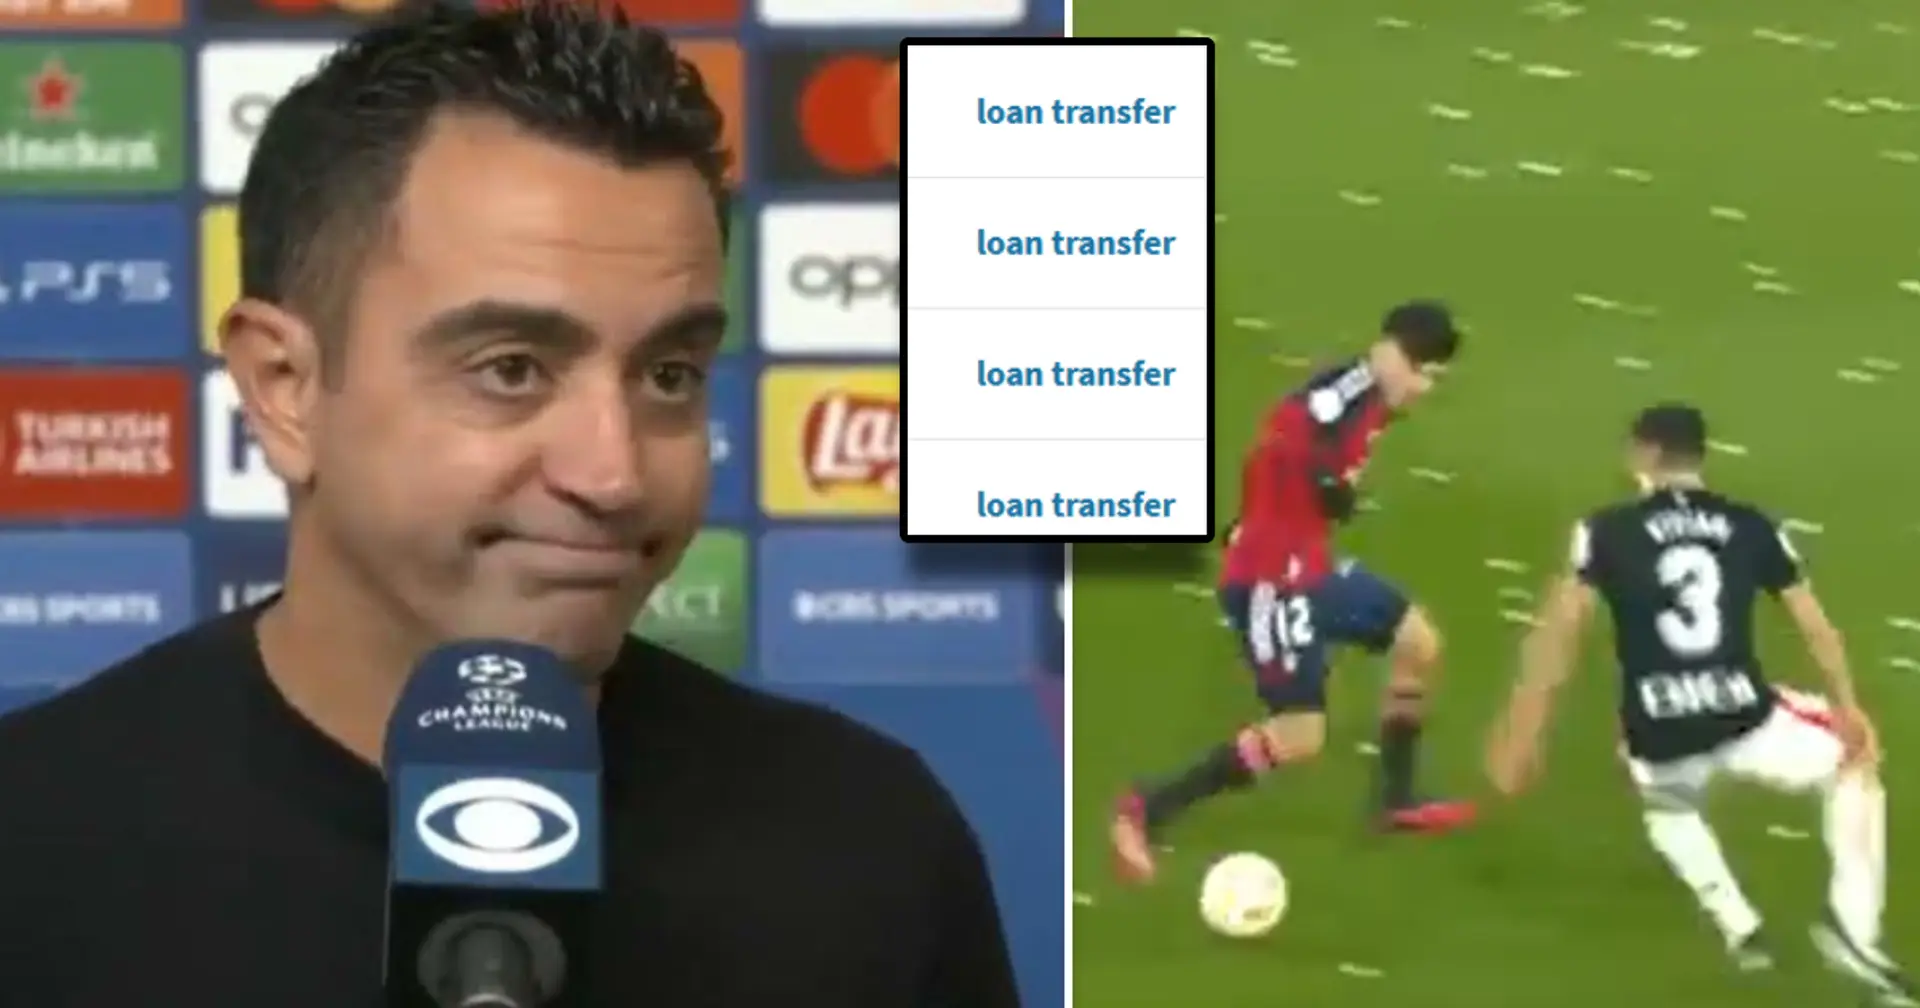 7 players loaned out by Barca this season — Xavi wants one back in squad next season